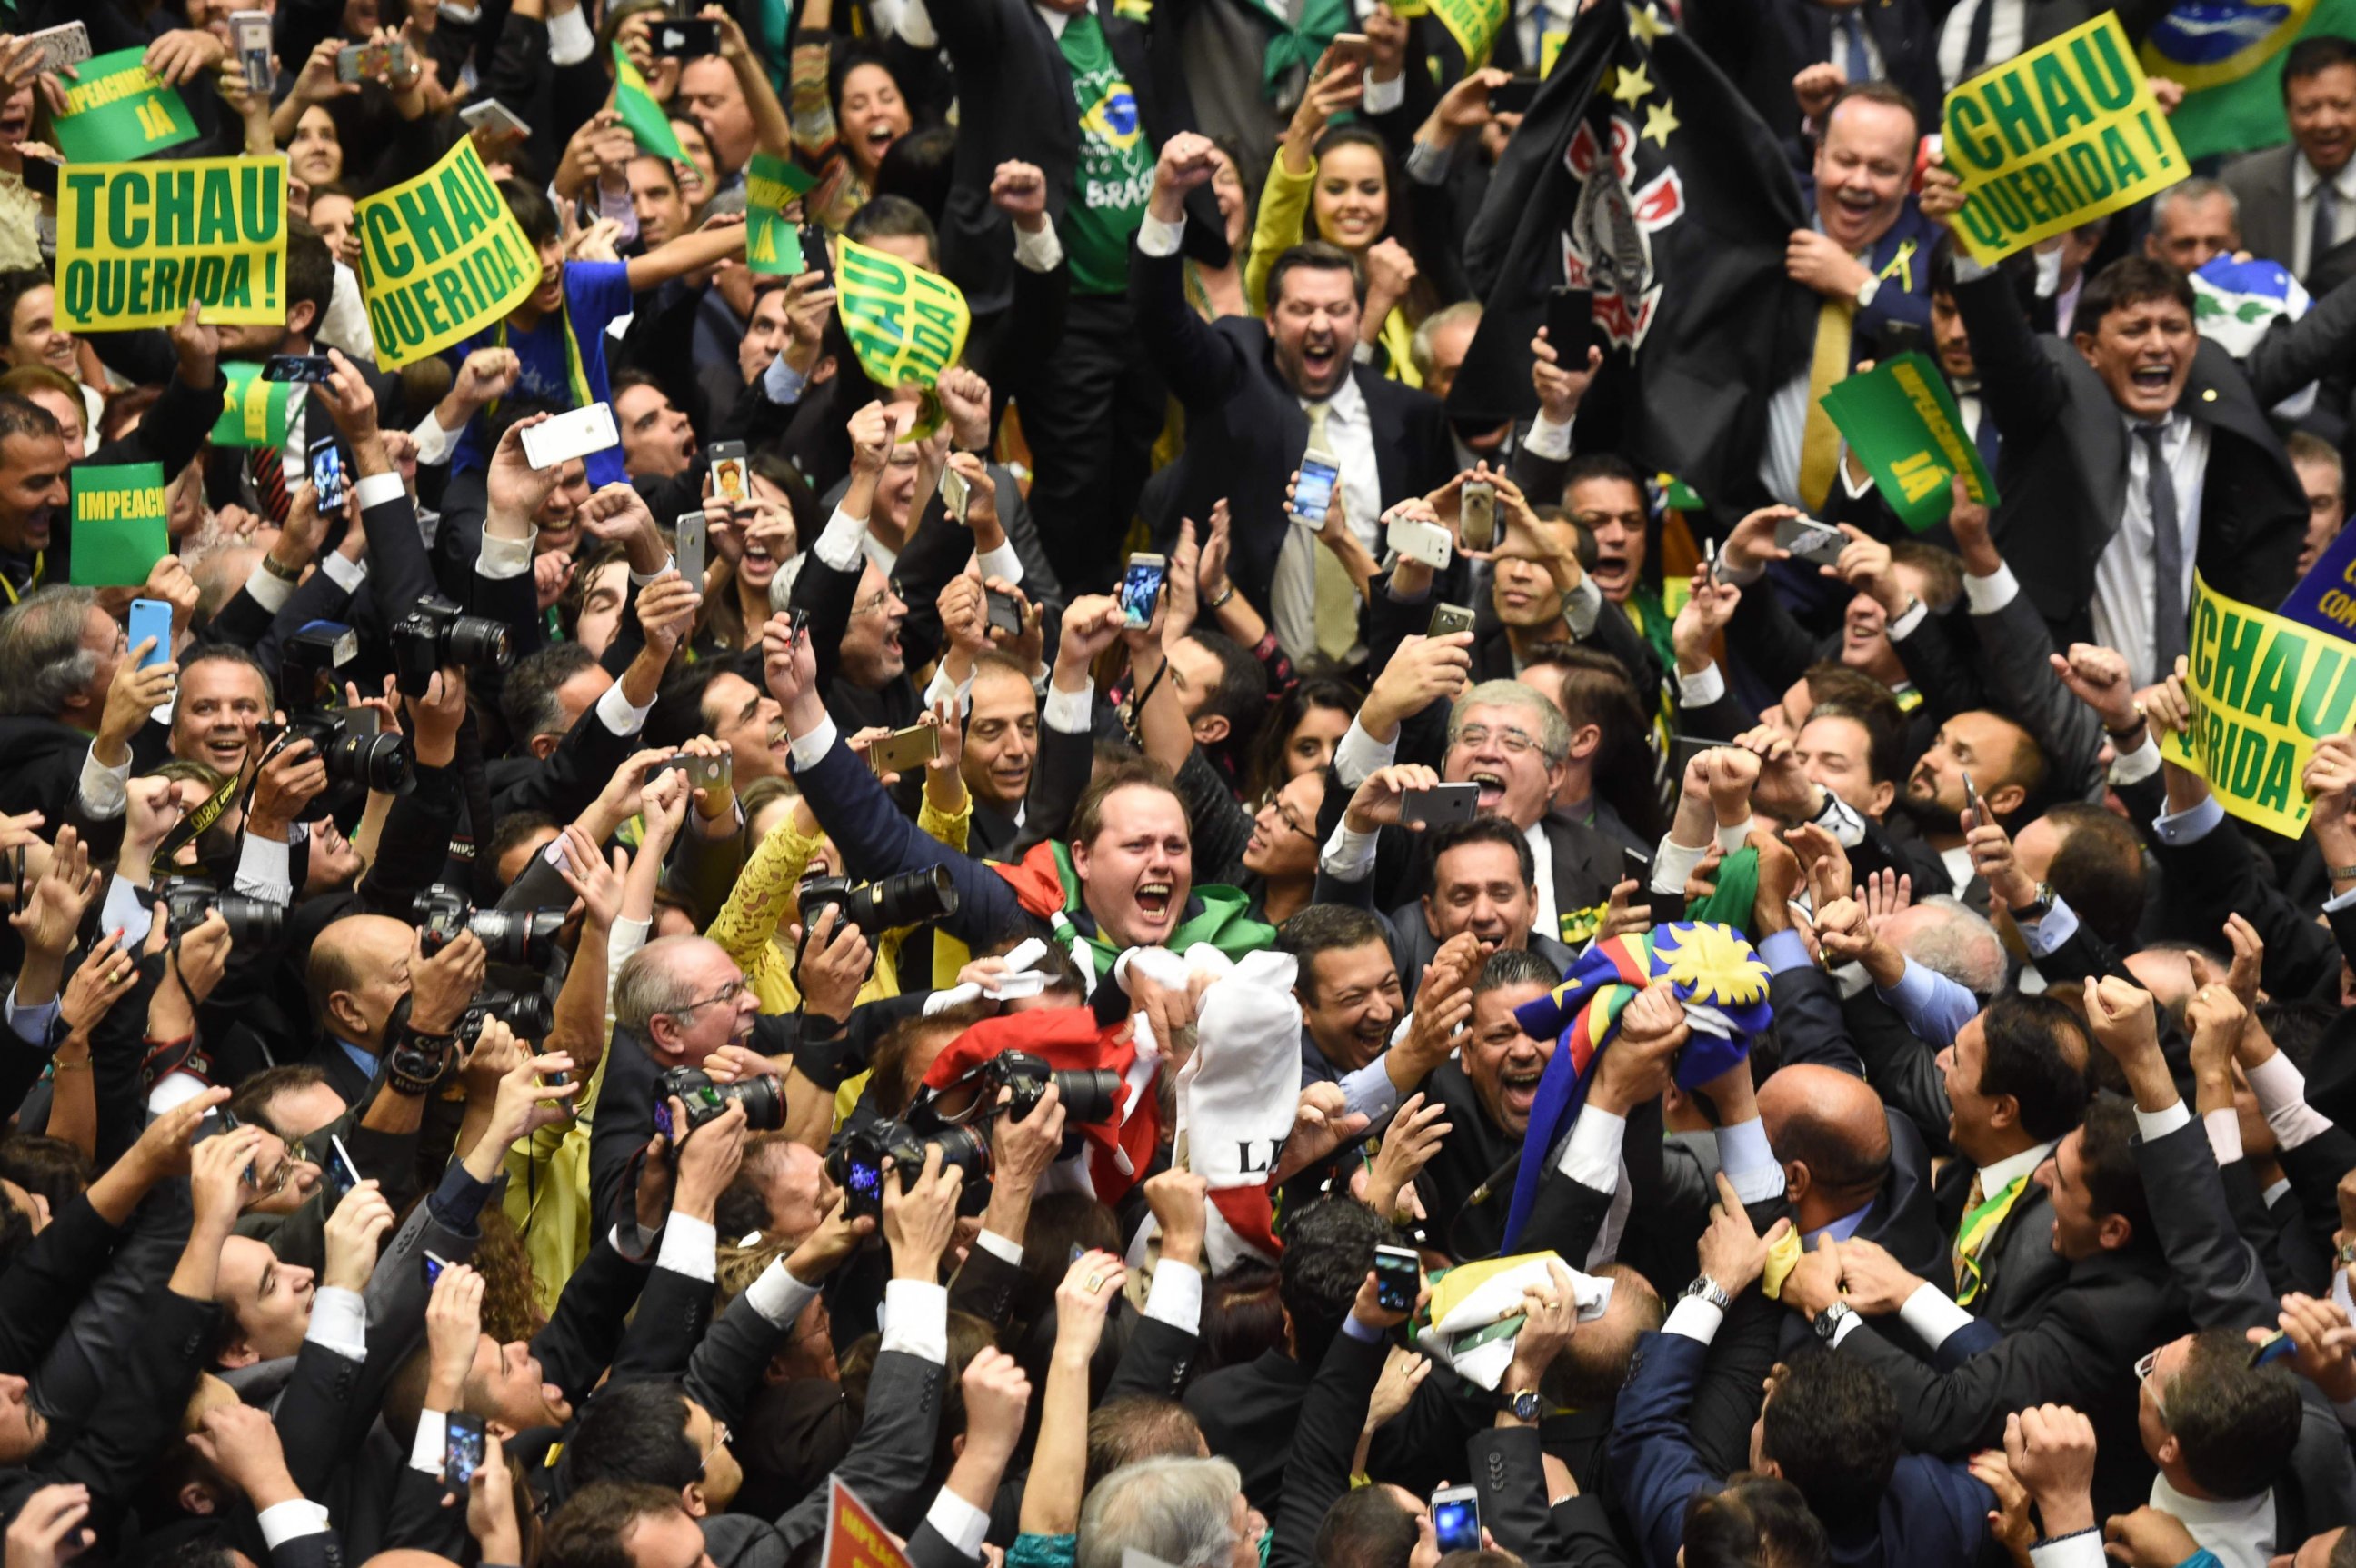 PHOTO:  Brazil's lawmakers celebrate after they reached the votes needed to authorize President Dilma Rousseff's impeachment to go ahead, at the Congress in Brasilia, April 17, 2016. 